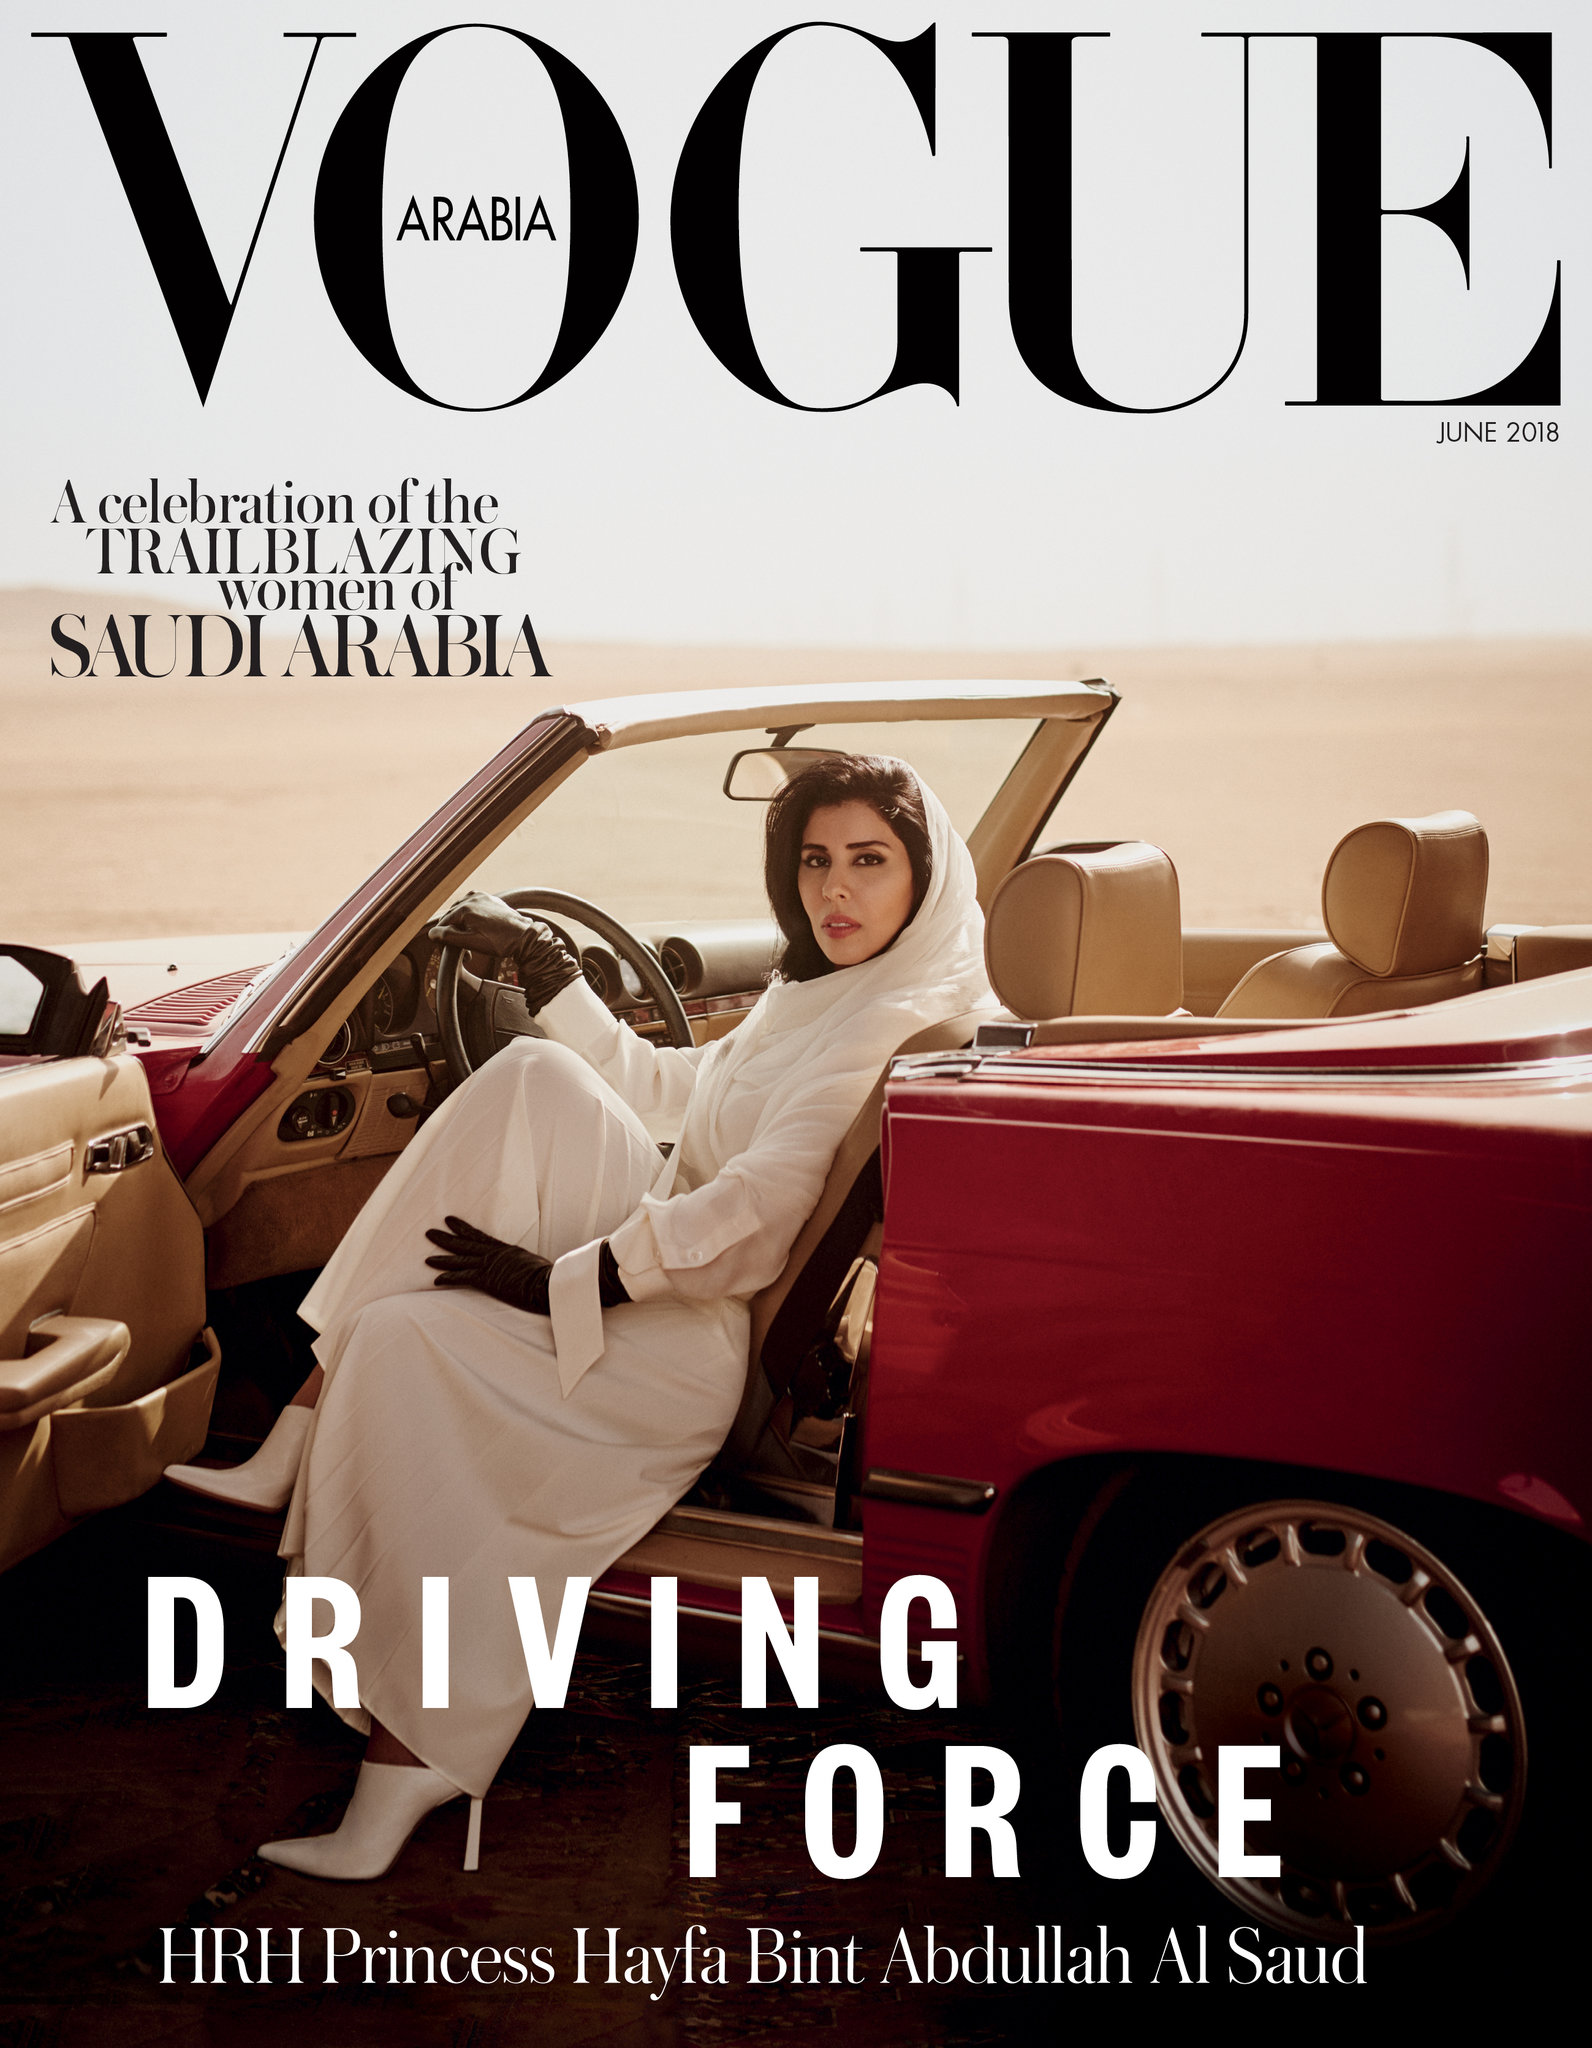 Vogue Arabia faces flak for featuring Saudi Princess on June edition cover